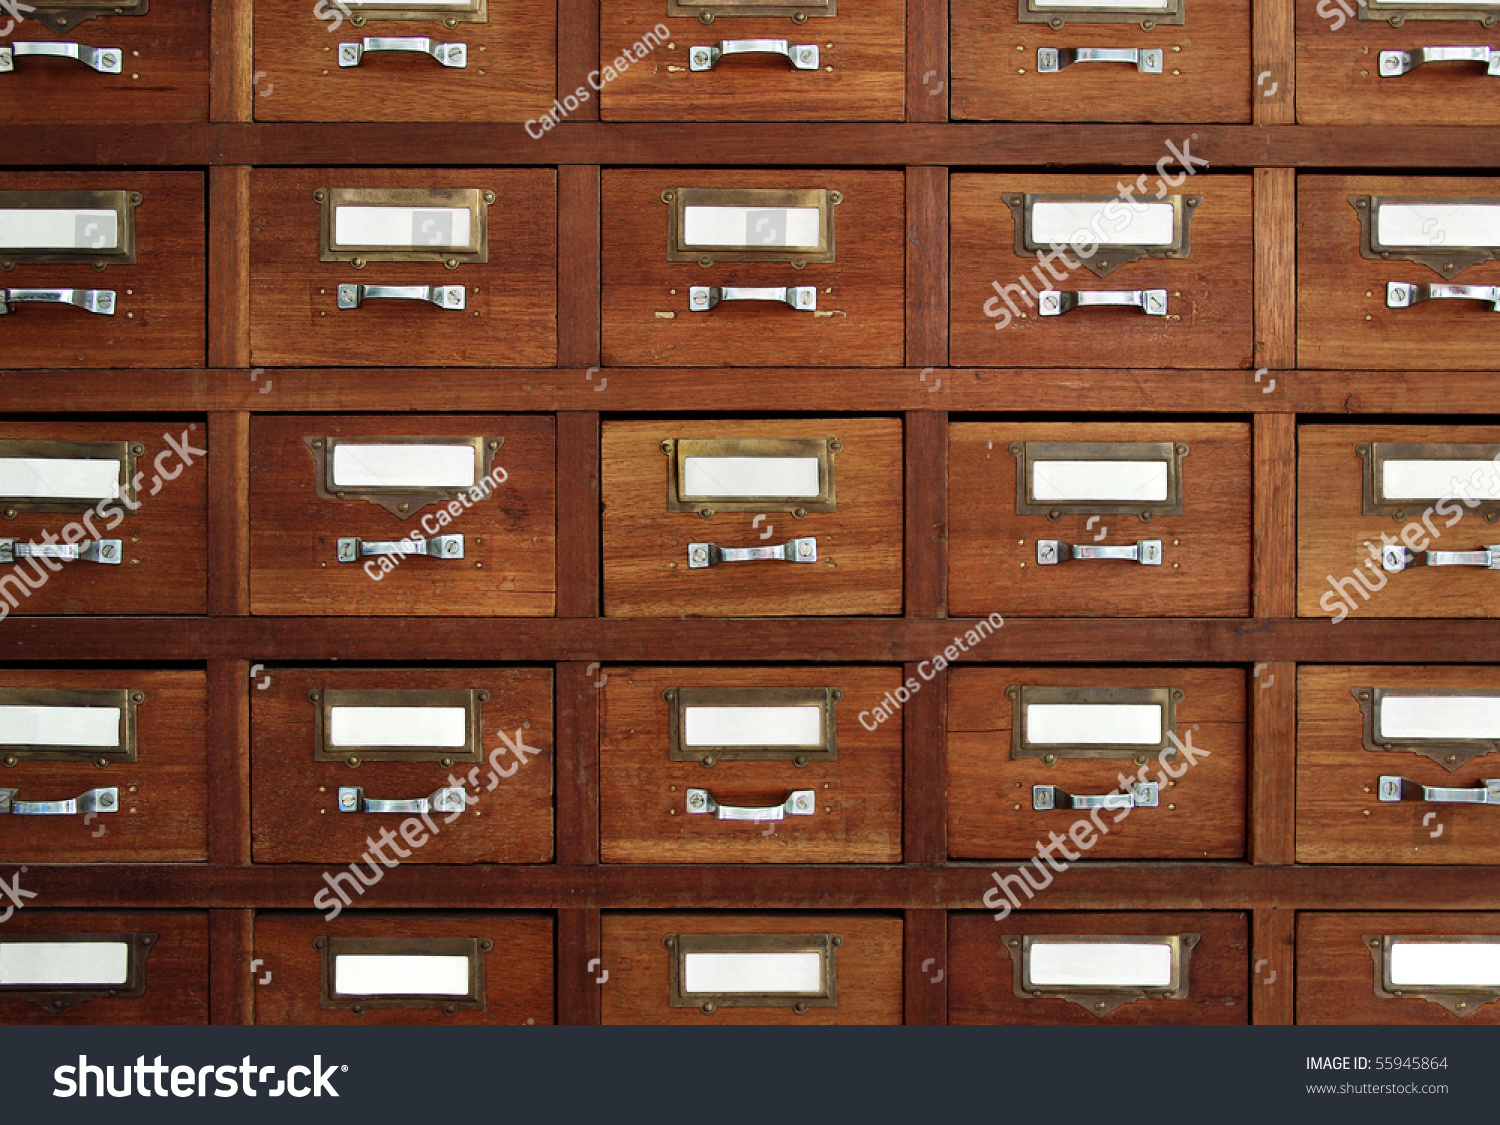 Rows Little Drawers White Empty Tags Royalty Free Stock Image